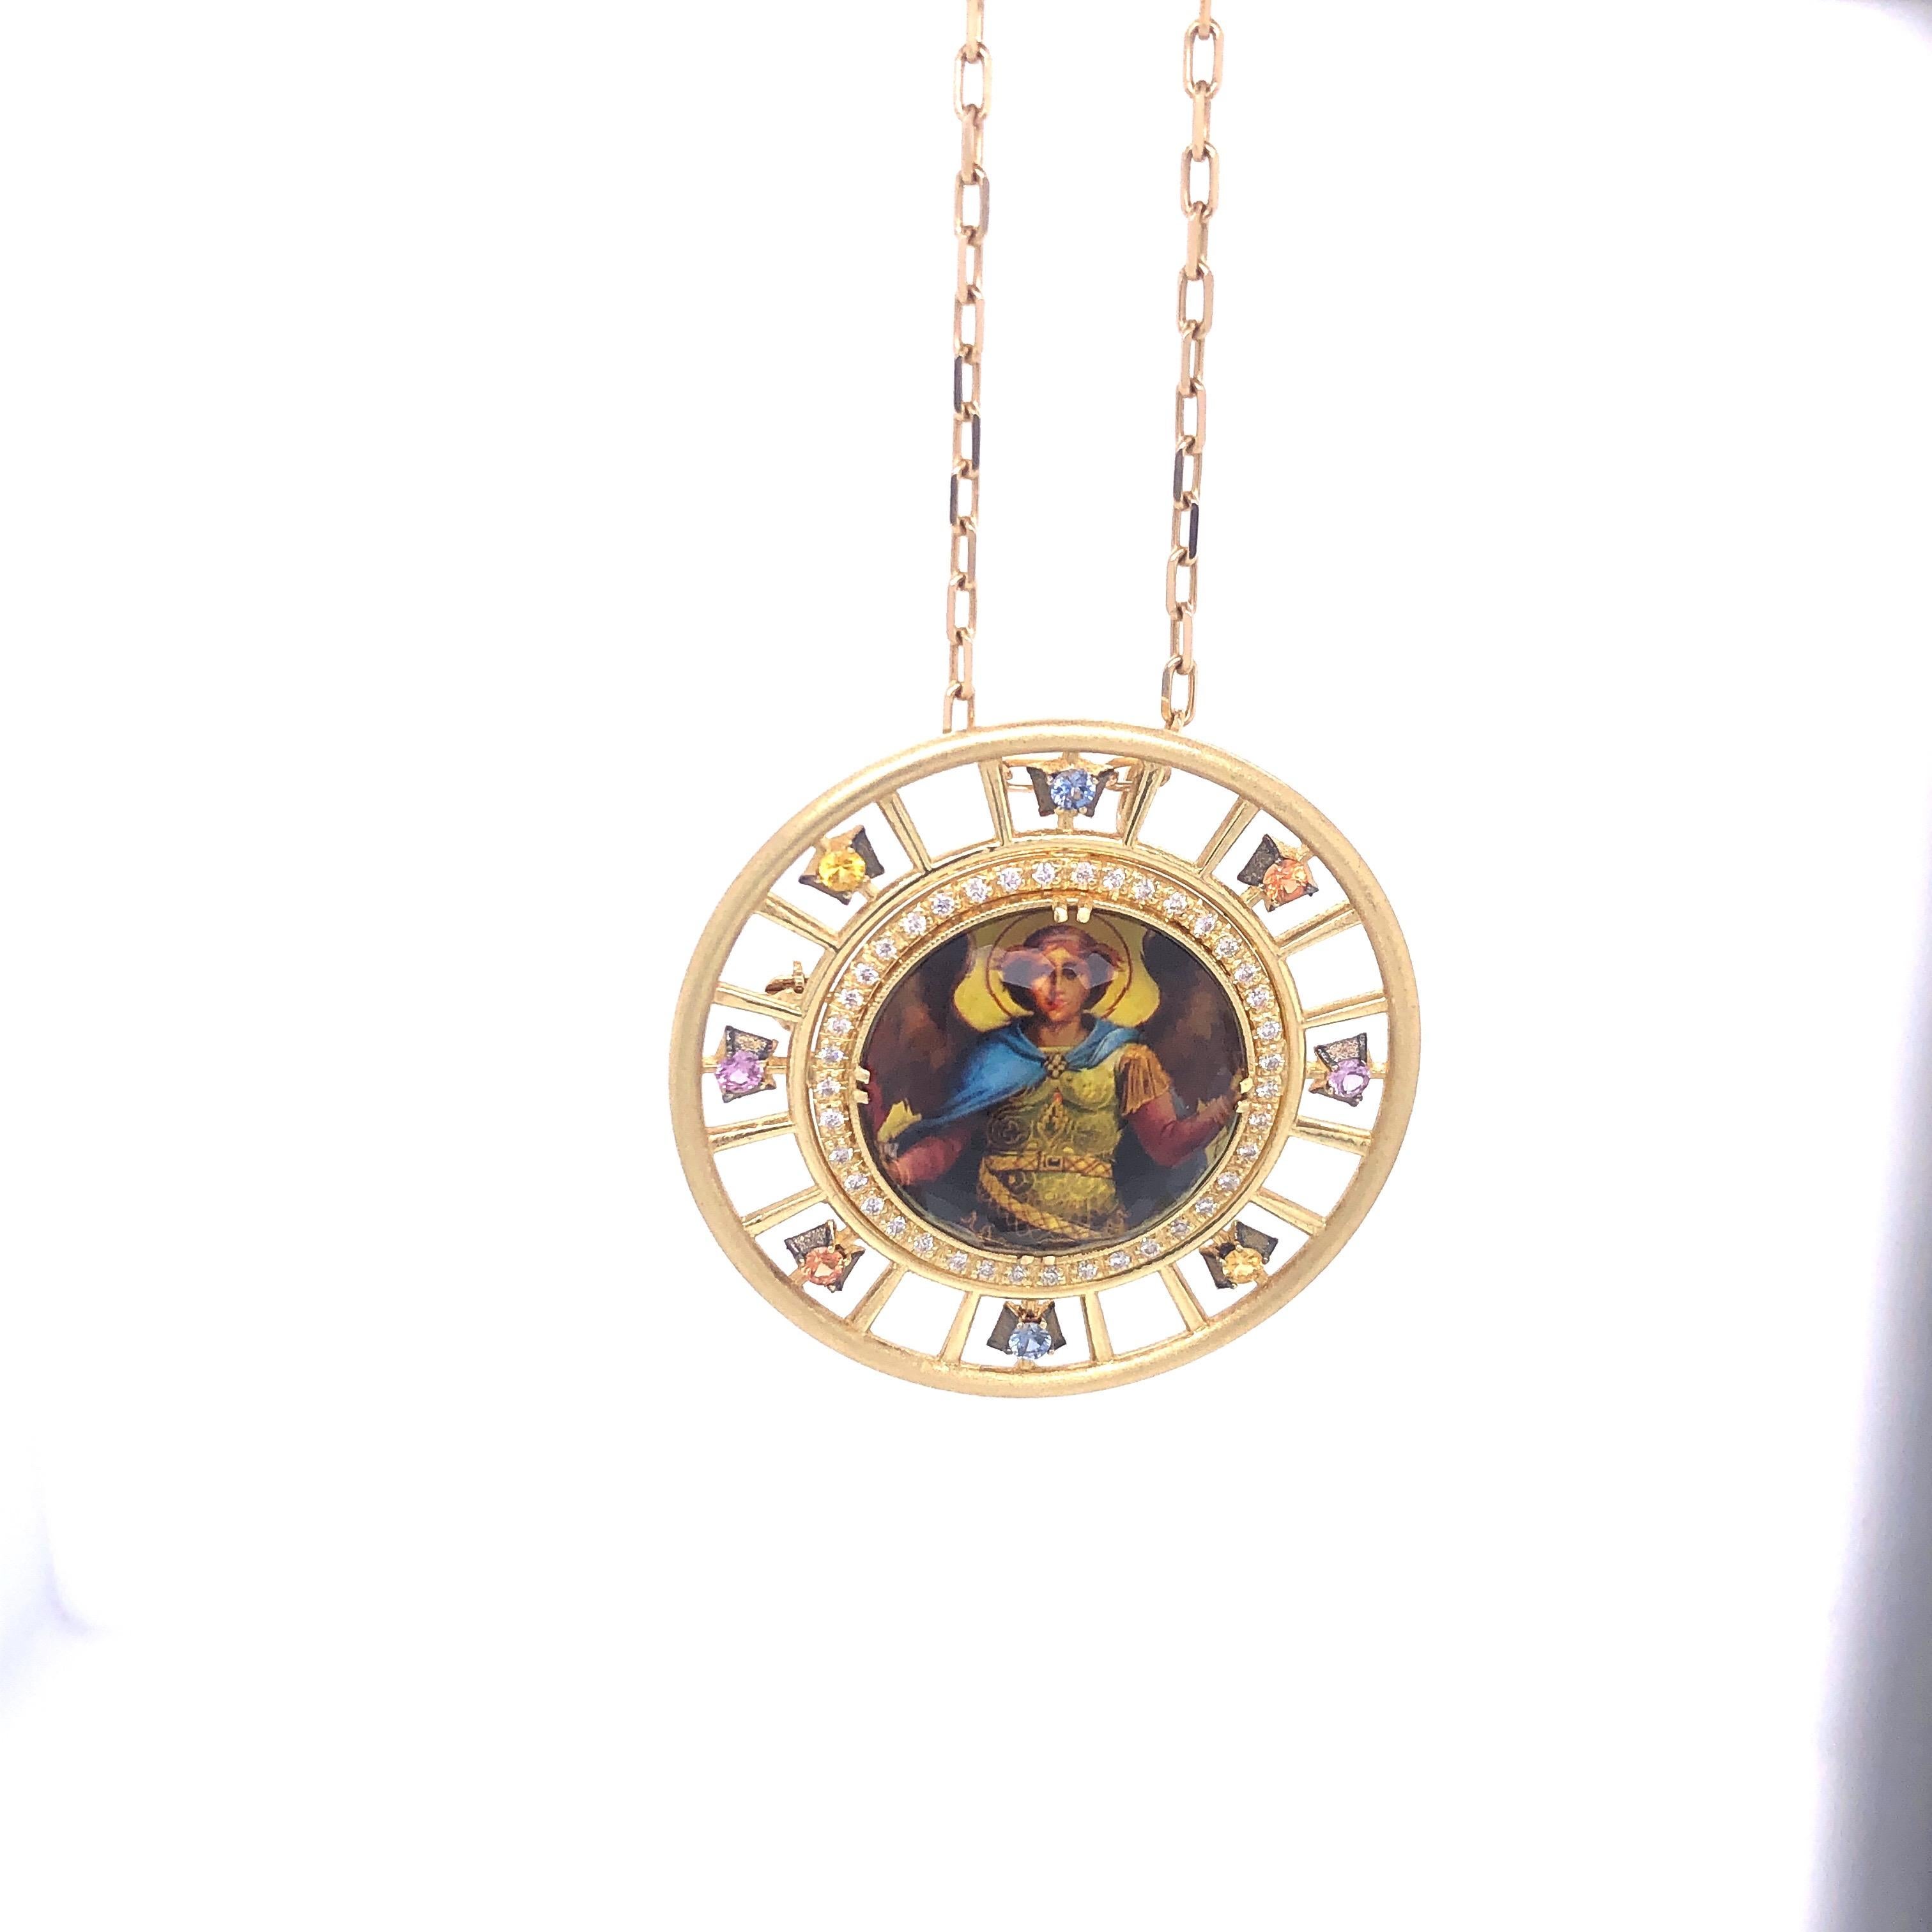 From Award Winning Designer Melissa Spencer: Angel St. Michael Spencer Portrait in 18K Yellow Gold with 40 Diamonds (.40cts), 2 Yellow, 2 Orange, 2 Blue and 2 Pink Sapphires (.64cttw). Paperclip Chain not included. 
This elegant setting features St.